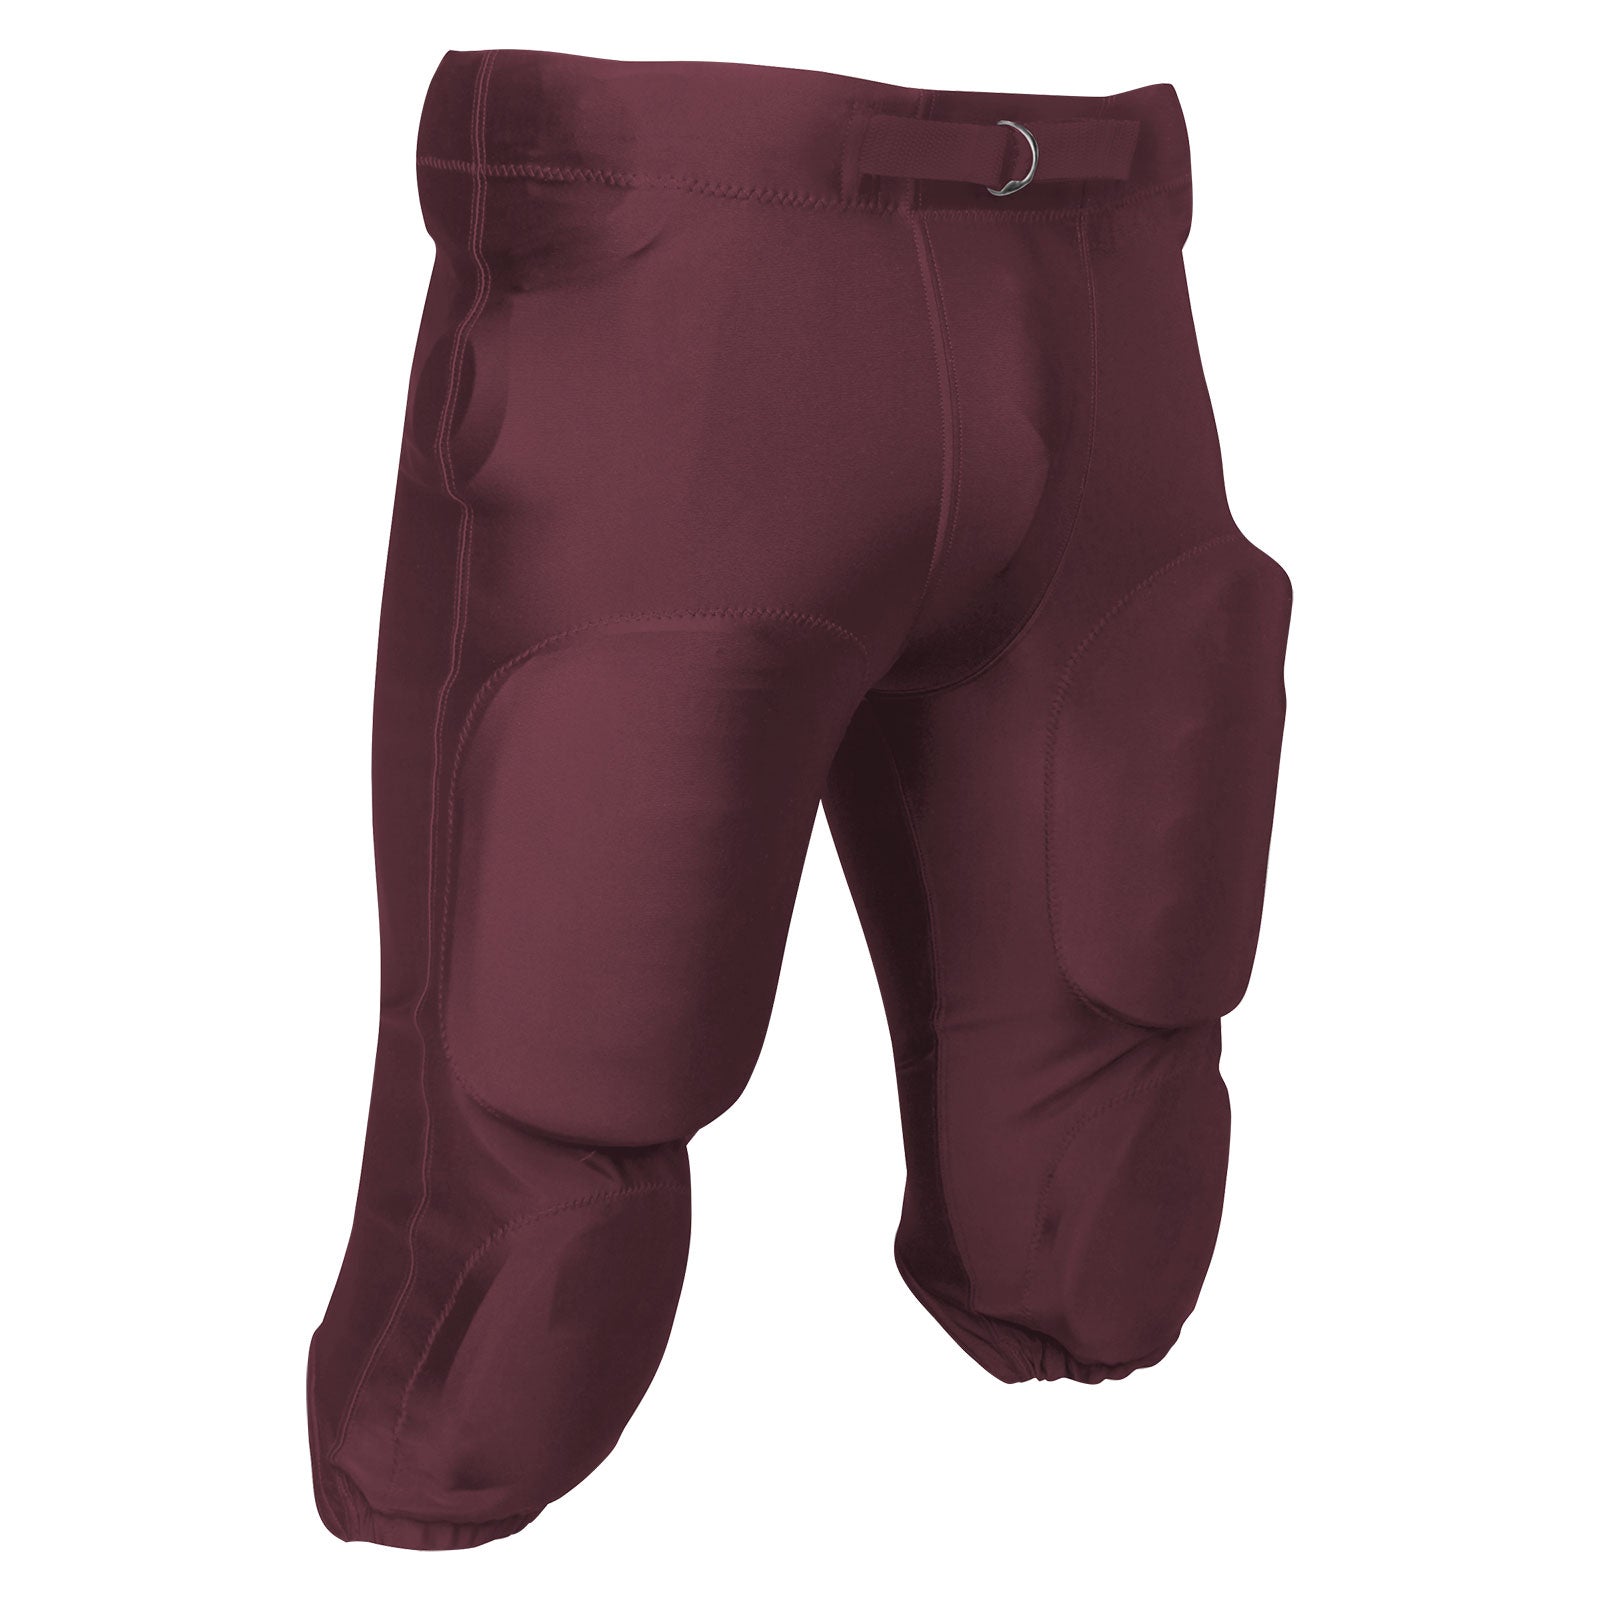 Traditional Football Pant With Pad Pockets MAROON BODY